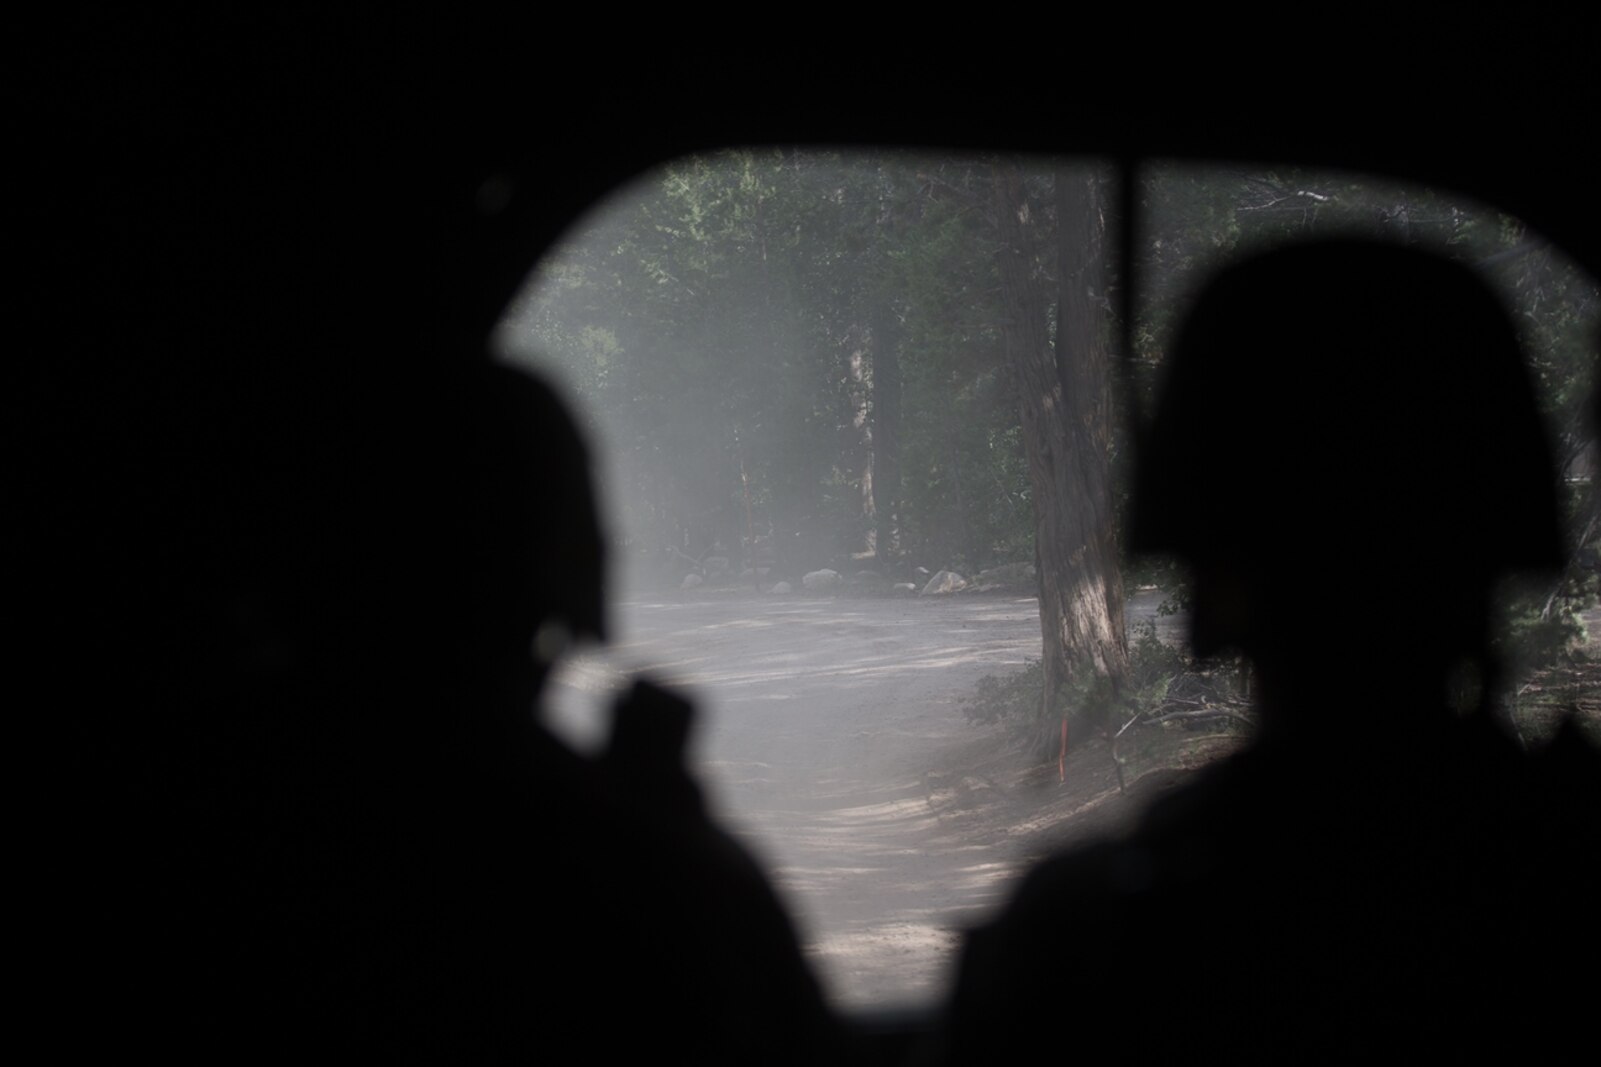 U.S. Marines with Combat Logistics Battalion 5, Combat Logistics Regiment 1, 1st Marine Logistics Group, posts for security in the rear of the convoy during Mountain Training Exercise 4-17 at Mountain Warfare Training Center, August 6, 2017. Marines in the last vehicle of the convoy posts security in case of enemy contact to the rear. (U.S. Marine Corps photo by Lance Cpl. Timothy Shoemaker)